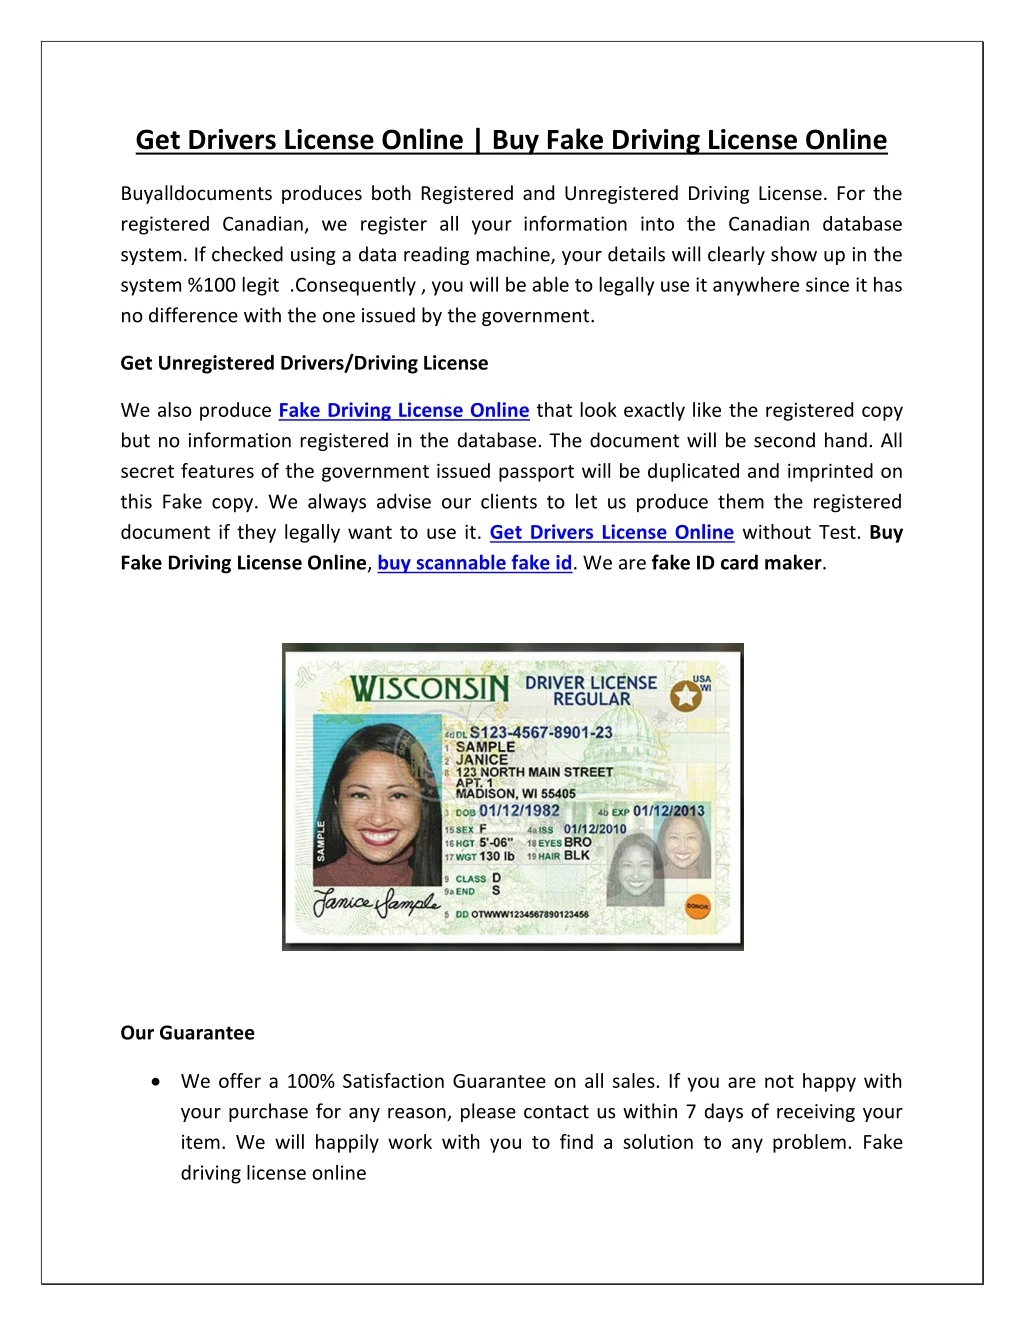 get drivers license online buy fake driving